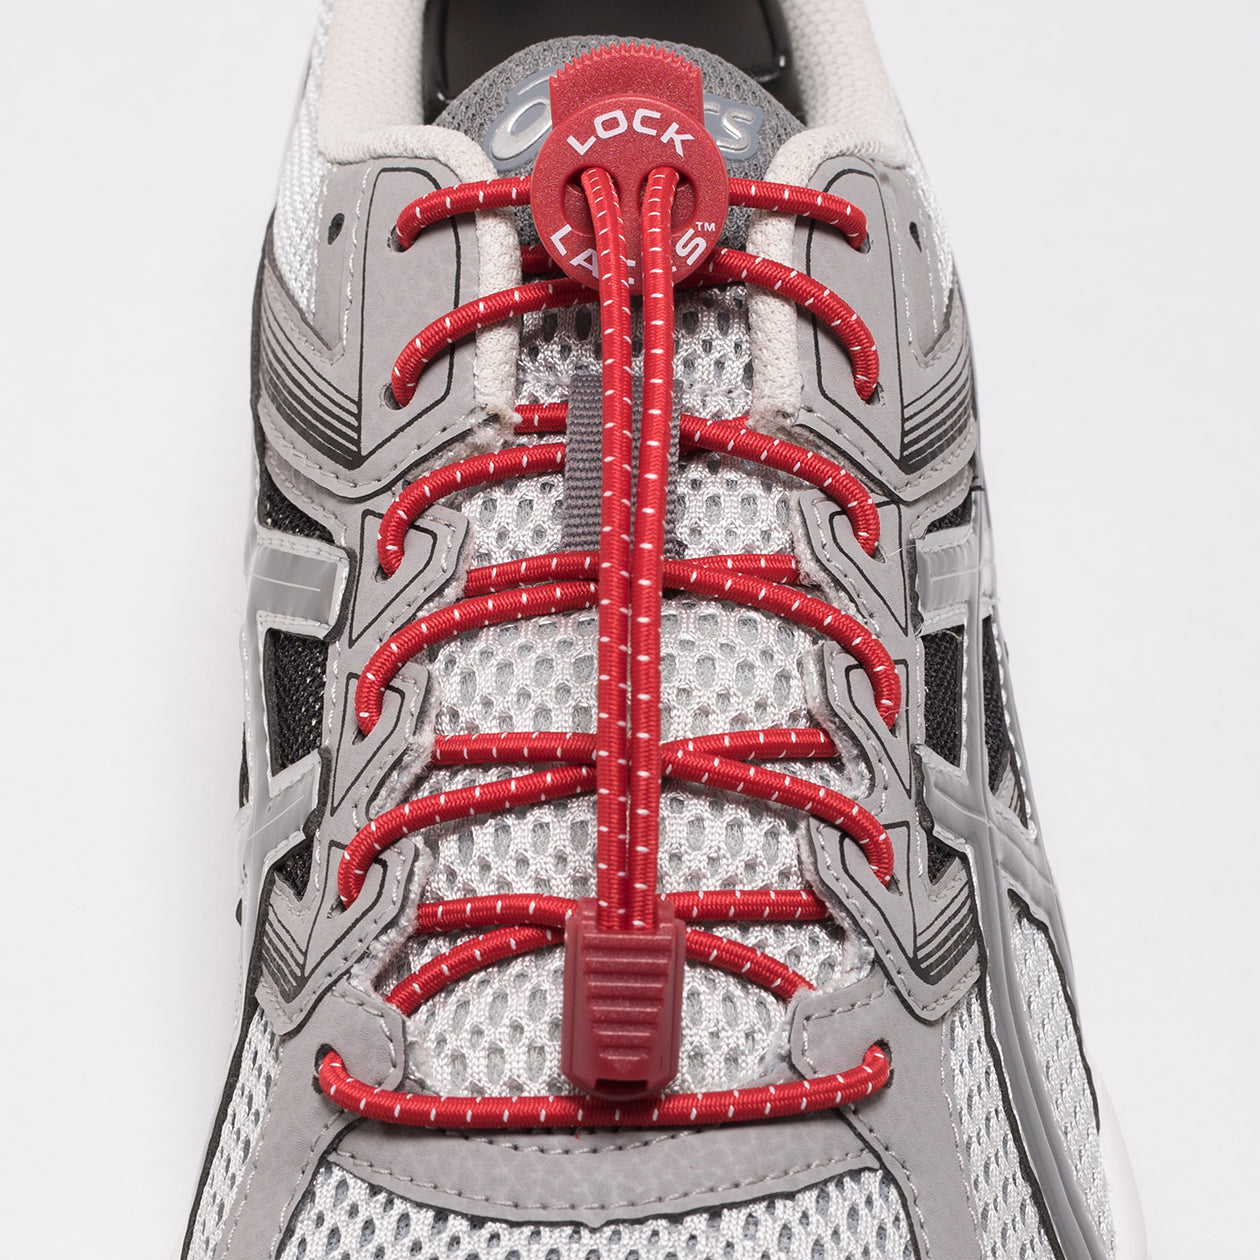 Lock Laces – Forerunners